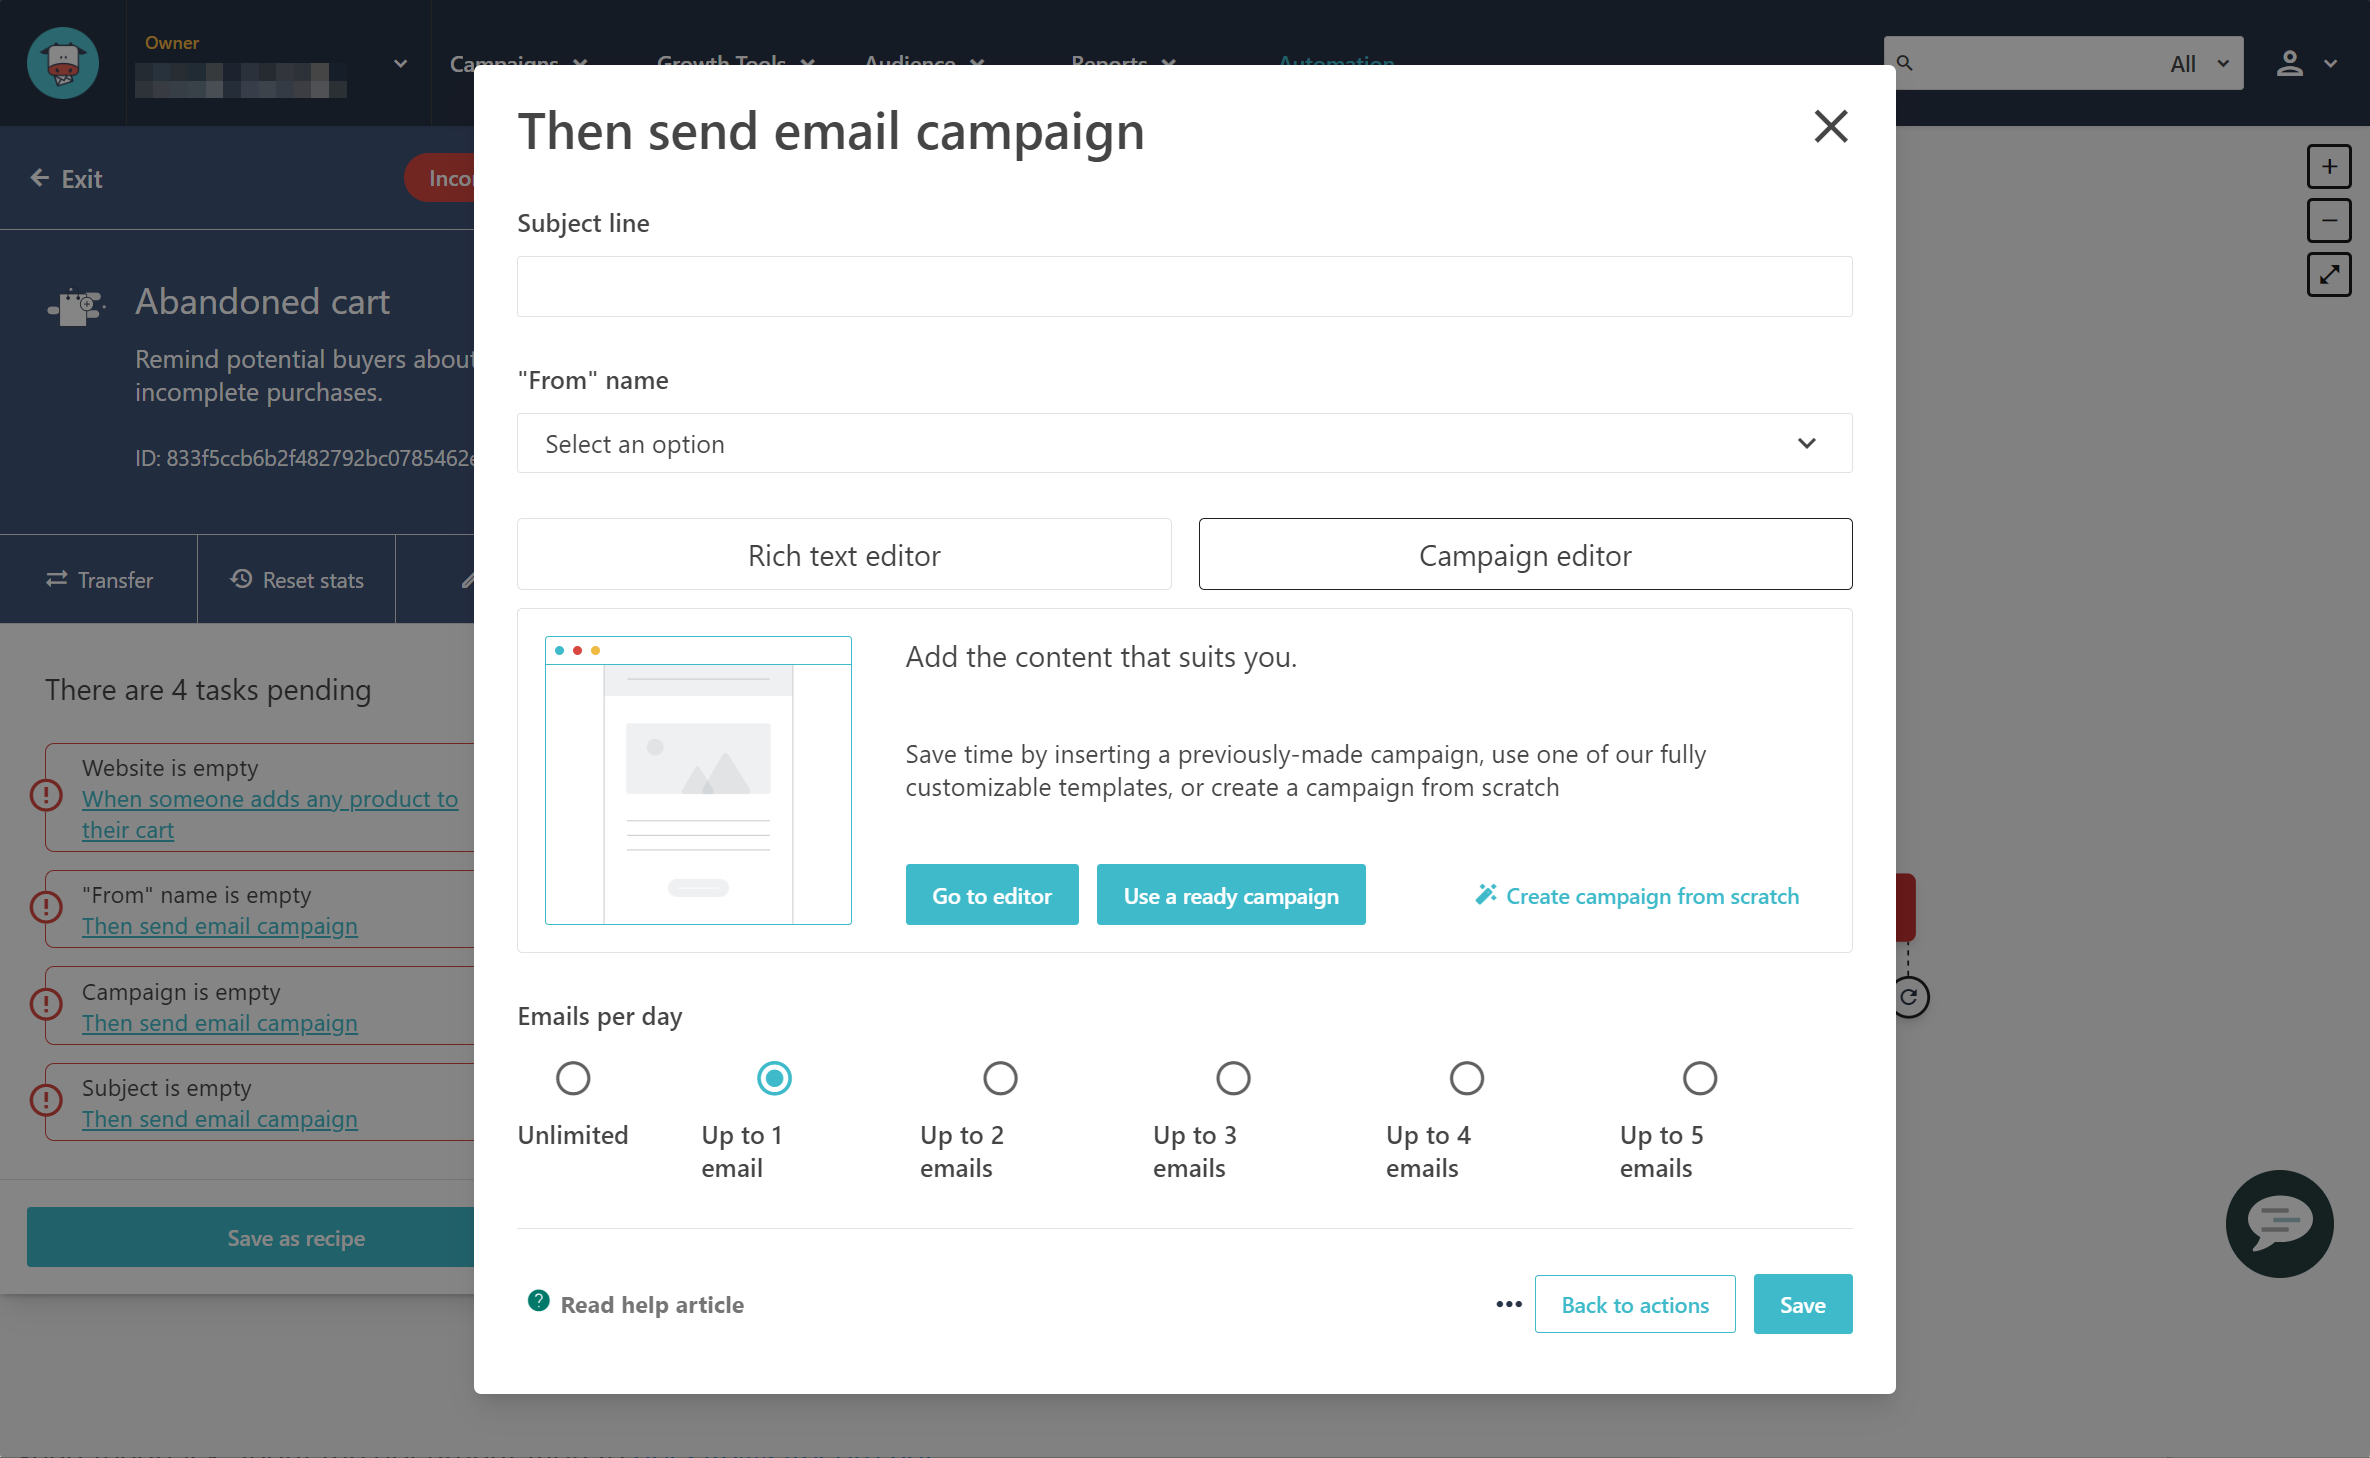 Use the Then send email campaign dialog to create your content